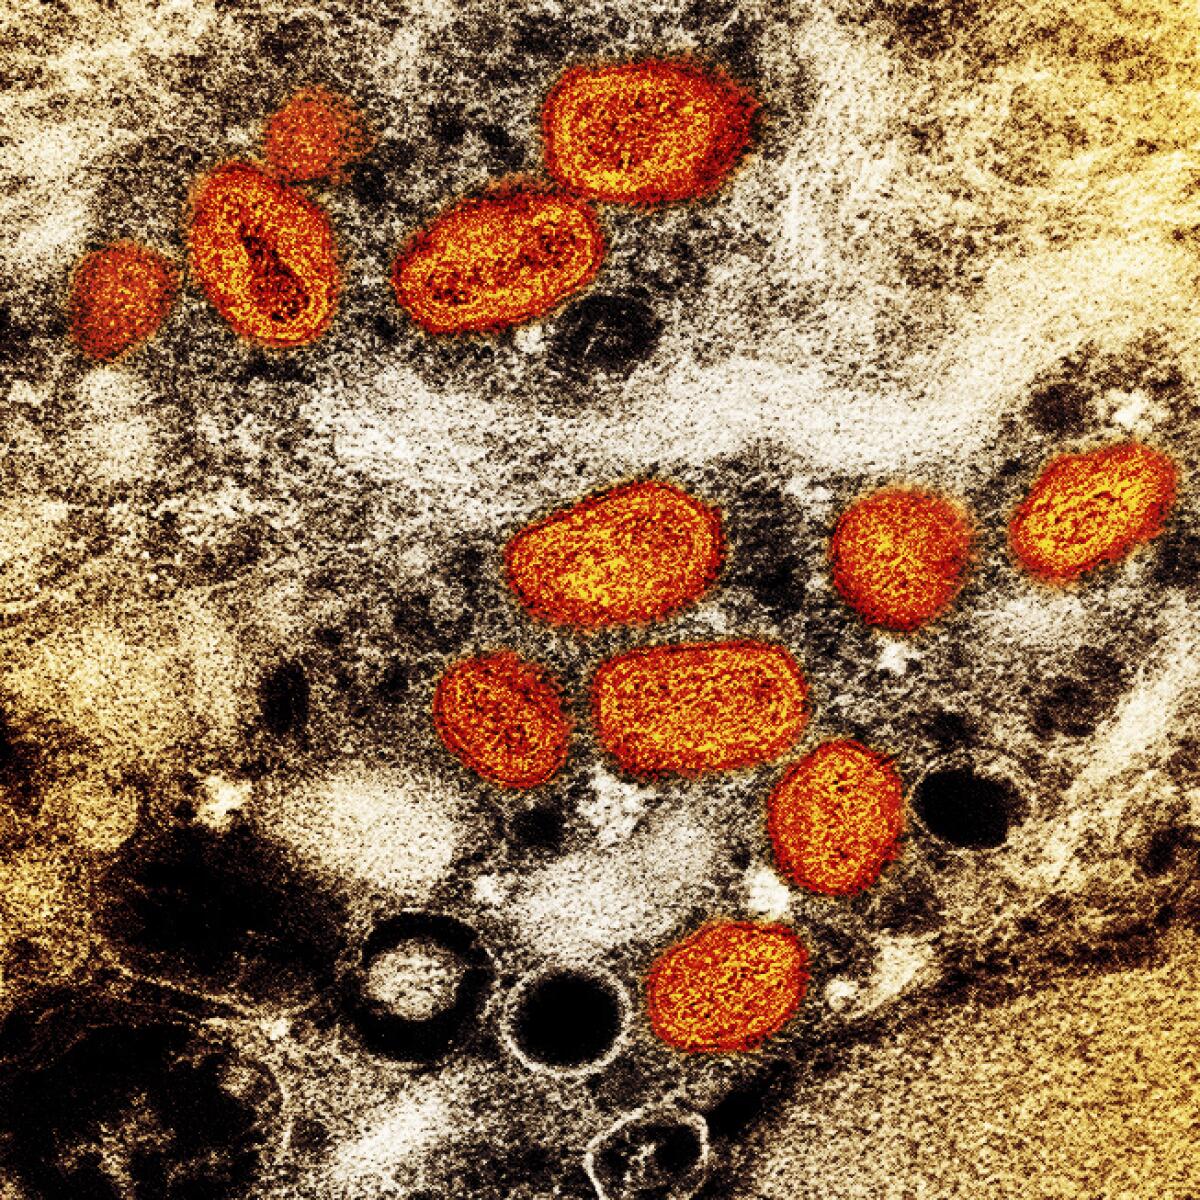 State and local public health officials say risk of Monkeypox remains very  low